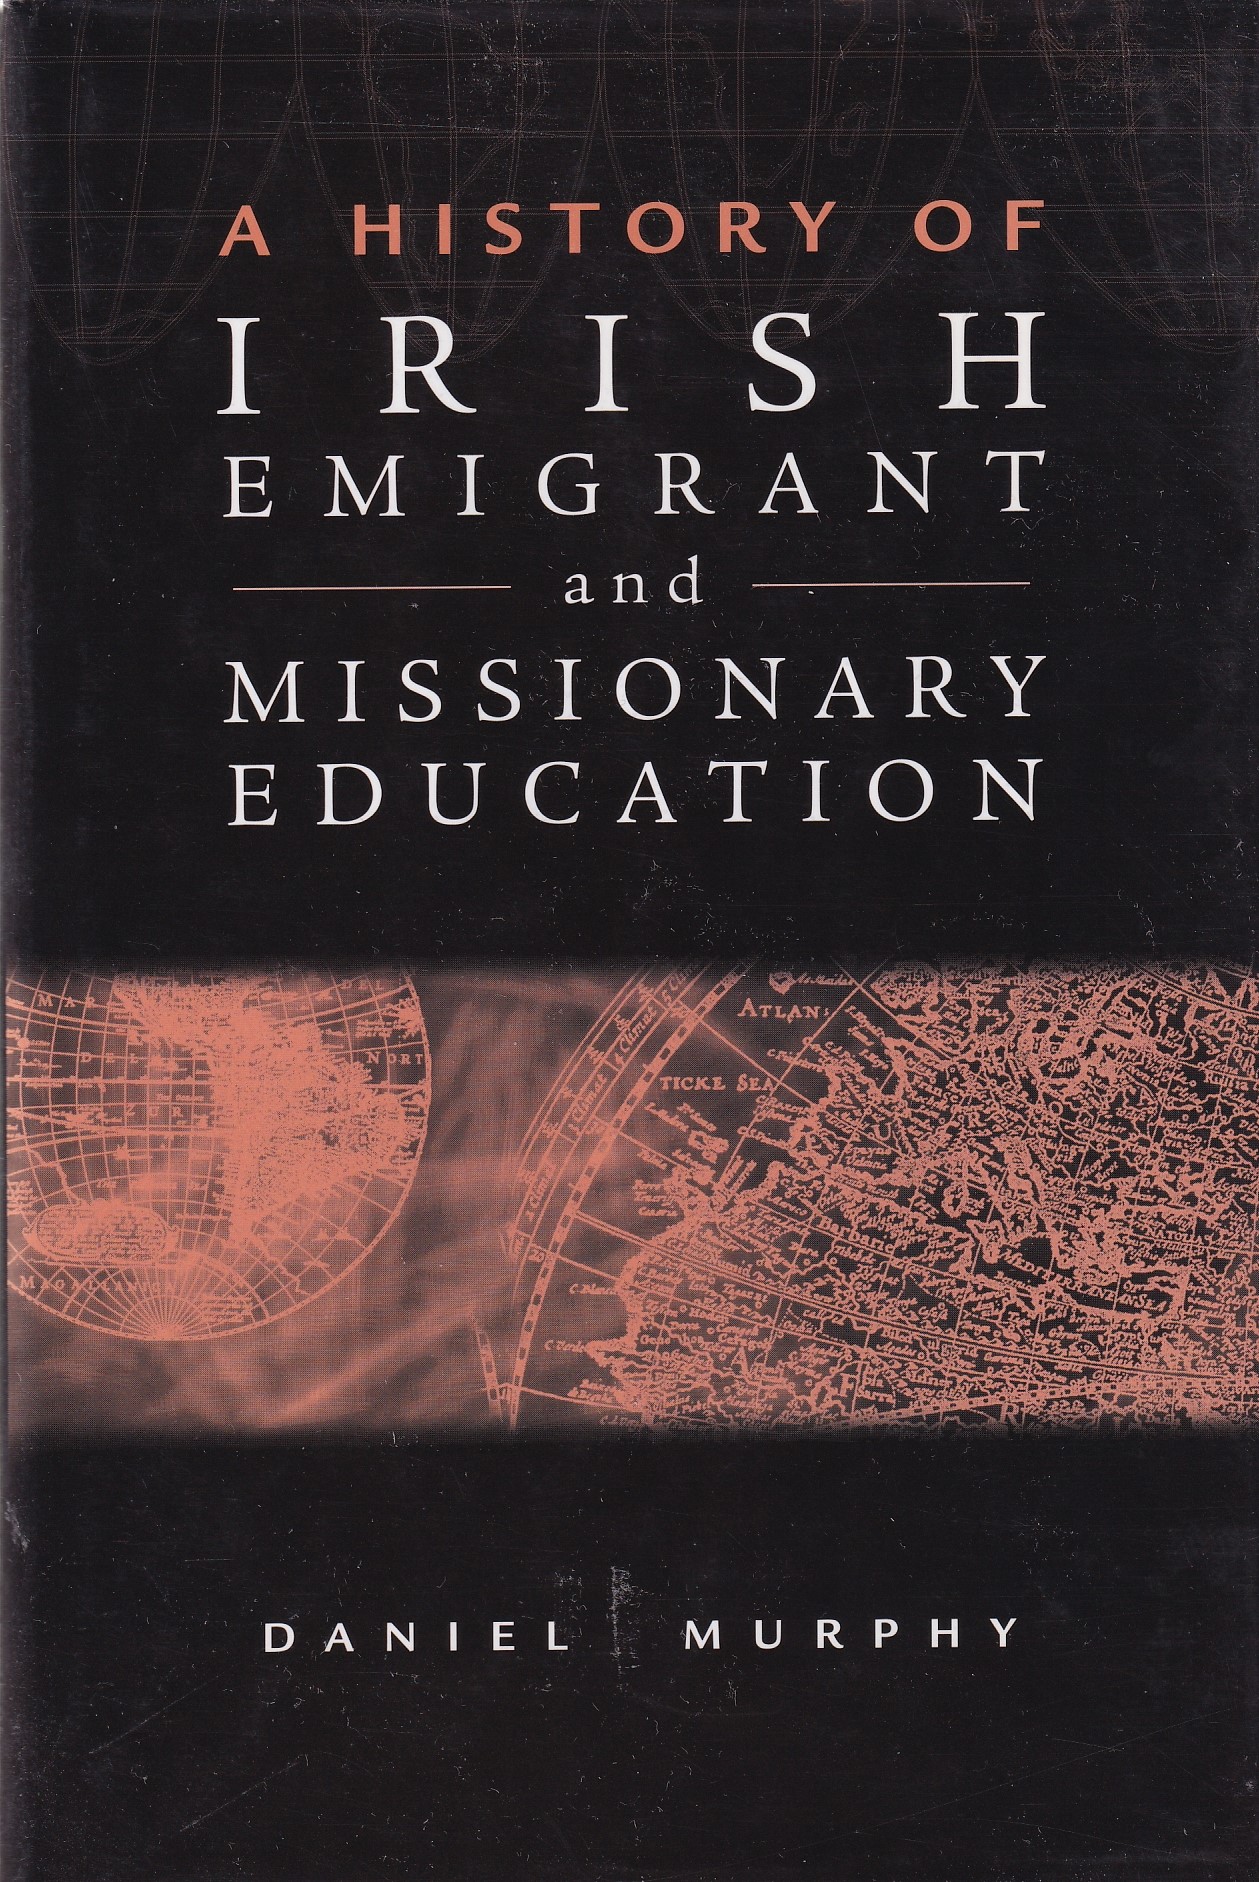 Irish Emigrant and Missionary Education: A History by Daniel Murphy